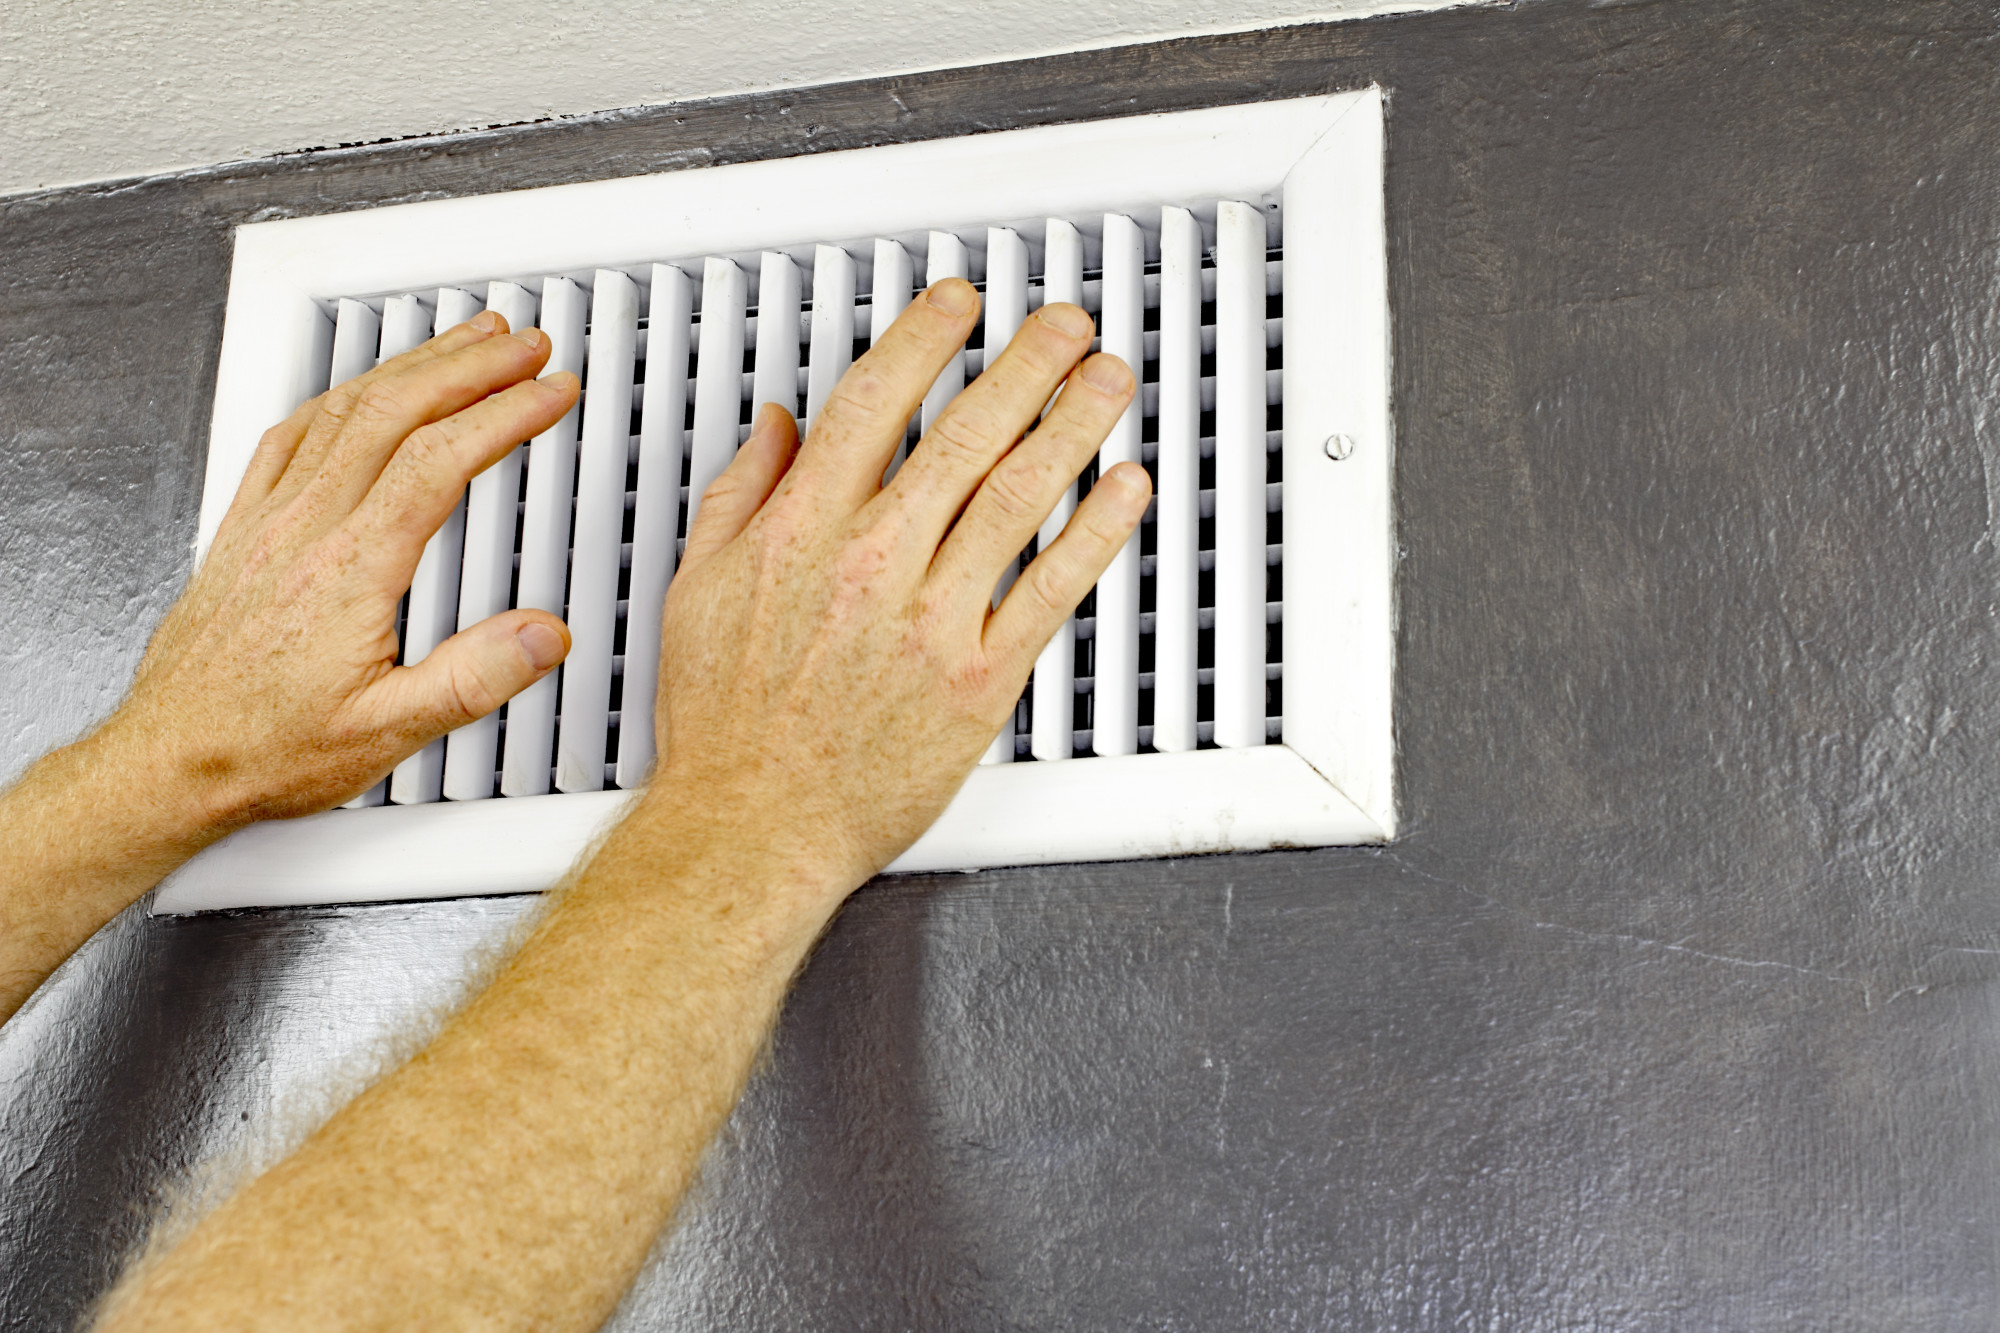 Two Hands in Front of an Air Vent